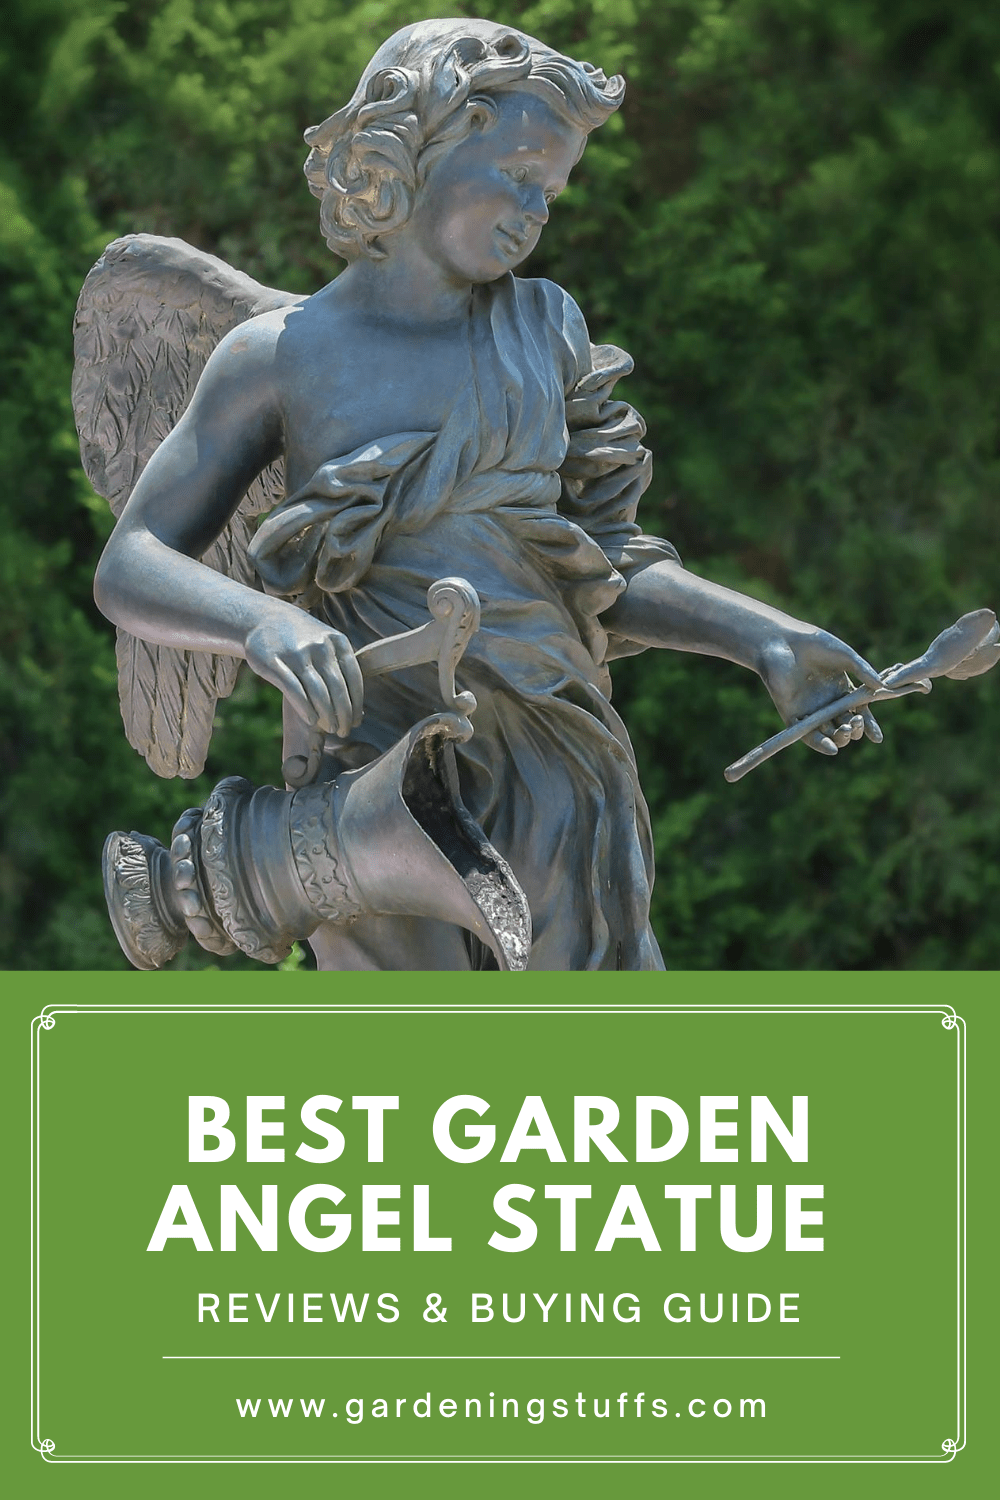 Stunning and elegant, guardian angel statues make for an eye-catching focal point in your outdoor garden. Check out this guide on my top 10 angel statues and highlighted the key features you need to know so you can pick the best one for your garden. Learn more about gardening tips @ #GardeningStuffs